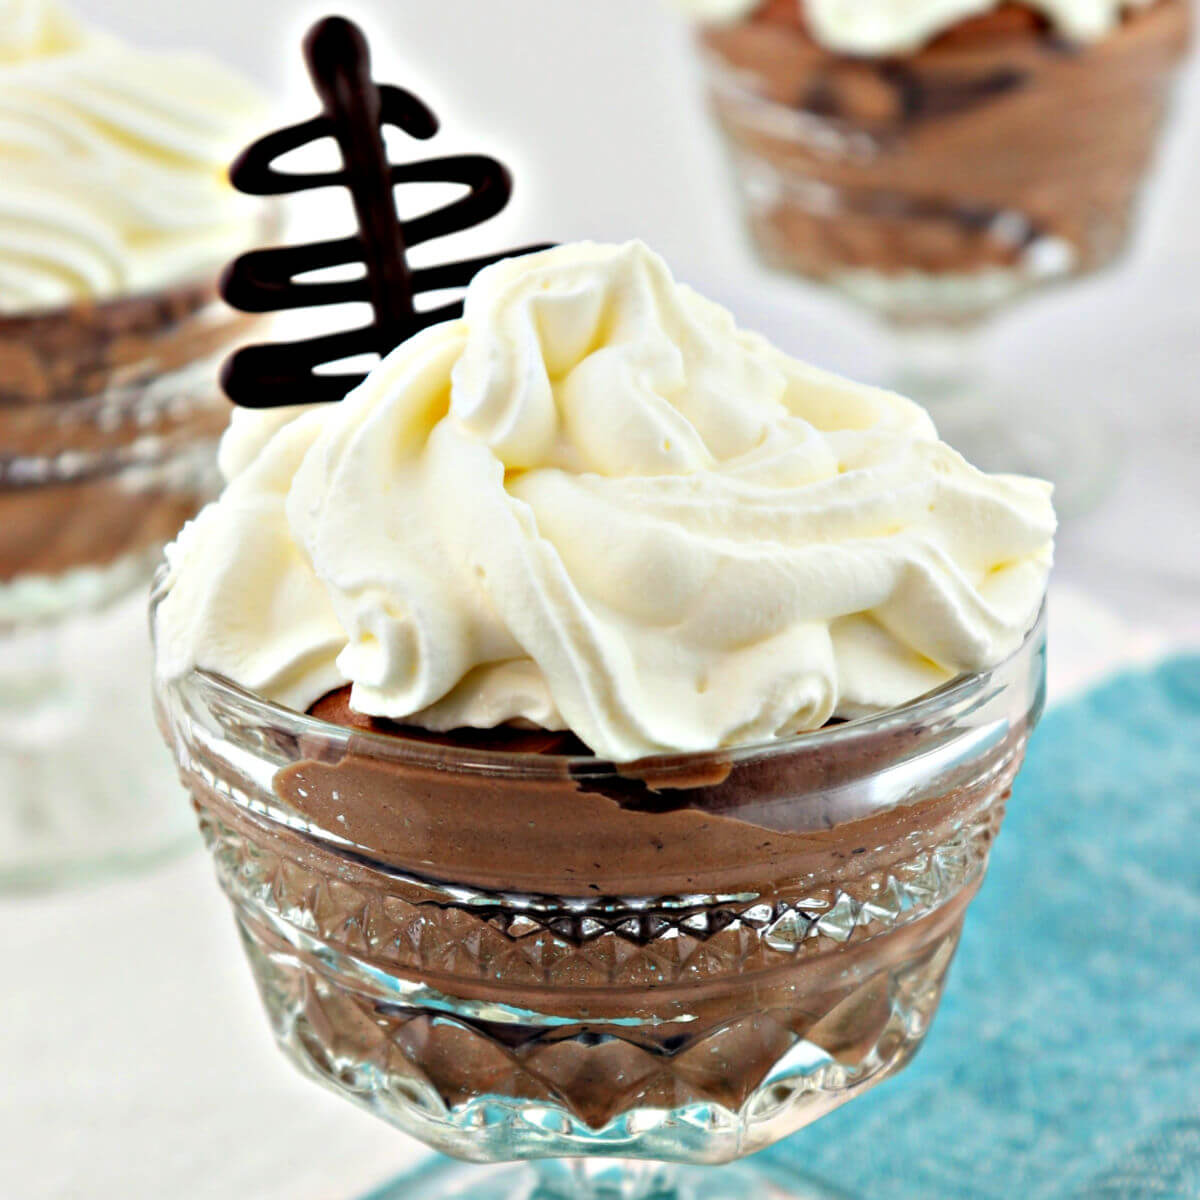 Delicious and creamy keto chocolate mousse is a quick and easy low carb dessert to whip up in no time. #ketodesserts #ketochocolate